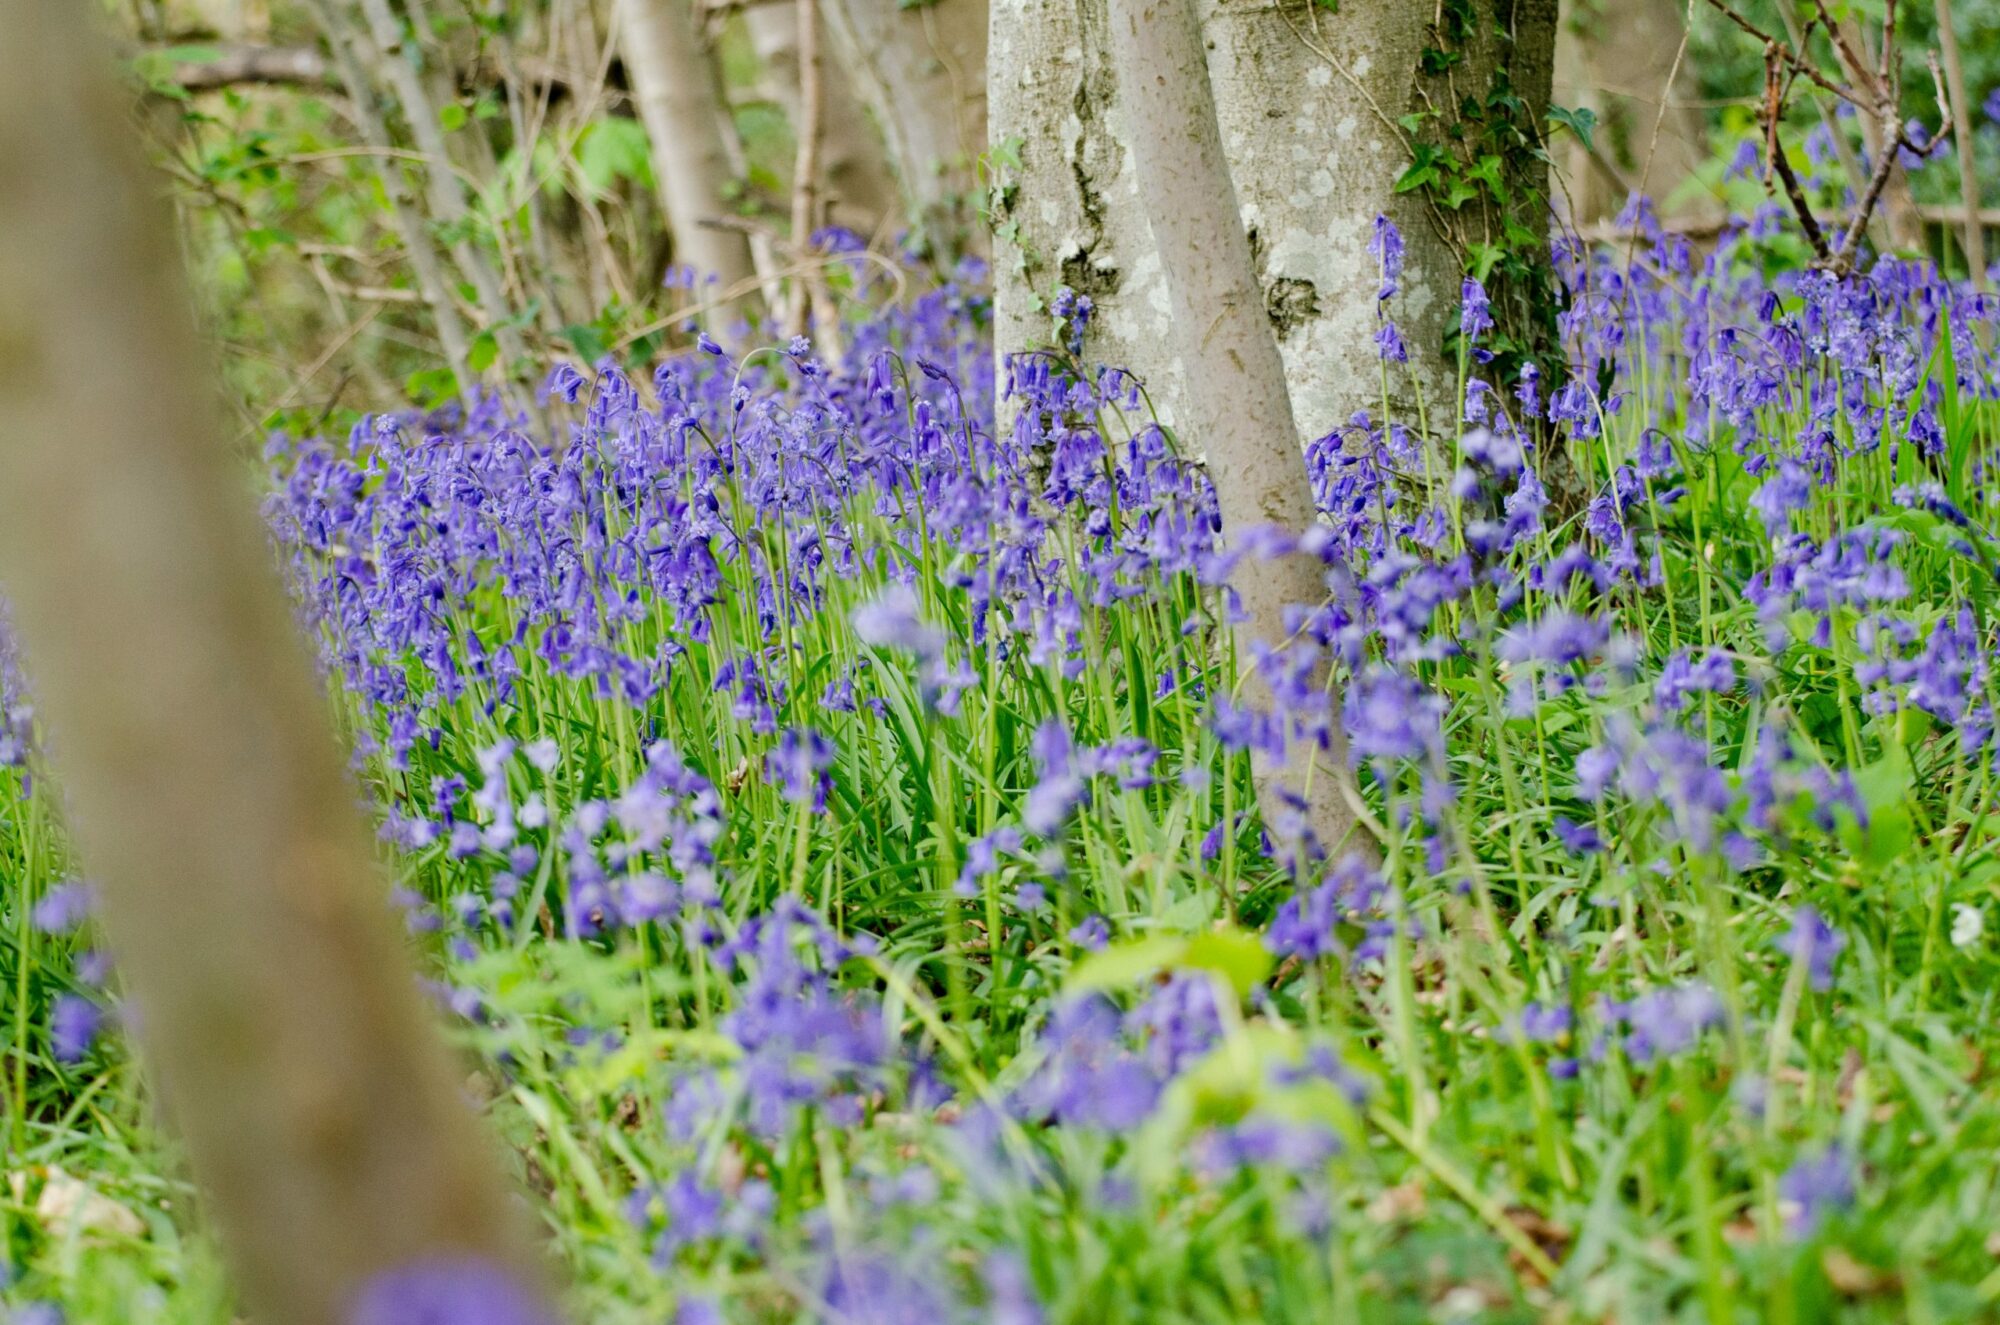 Image name Bluebells Josh Raper Conservation Media 5 scaled 1 the 19 image from the post Walking, Wellbeing and Wildlife in Yorkshire.com.